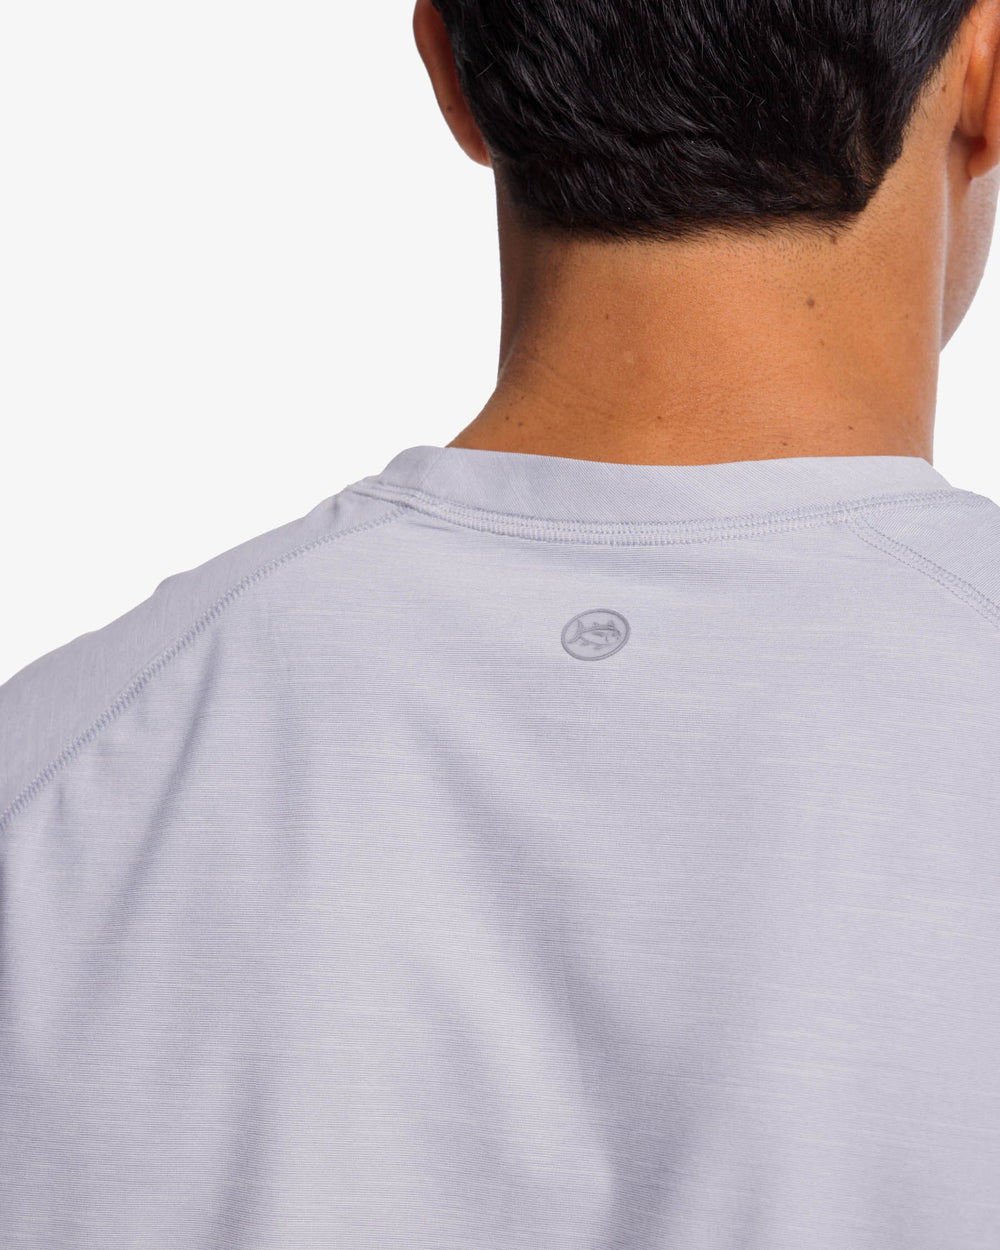 The yoke view of the Southern Tide brrr-illiant Performance Long Sleeve Tee by Southern Tide - Platinum Grey